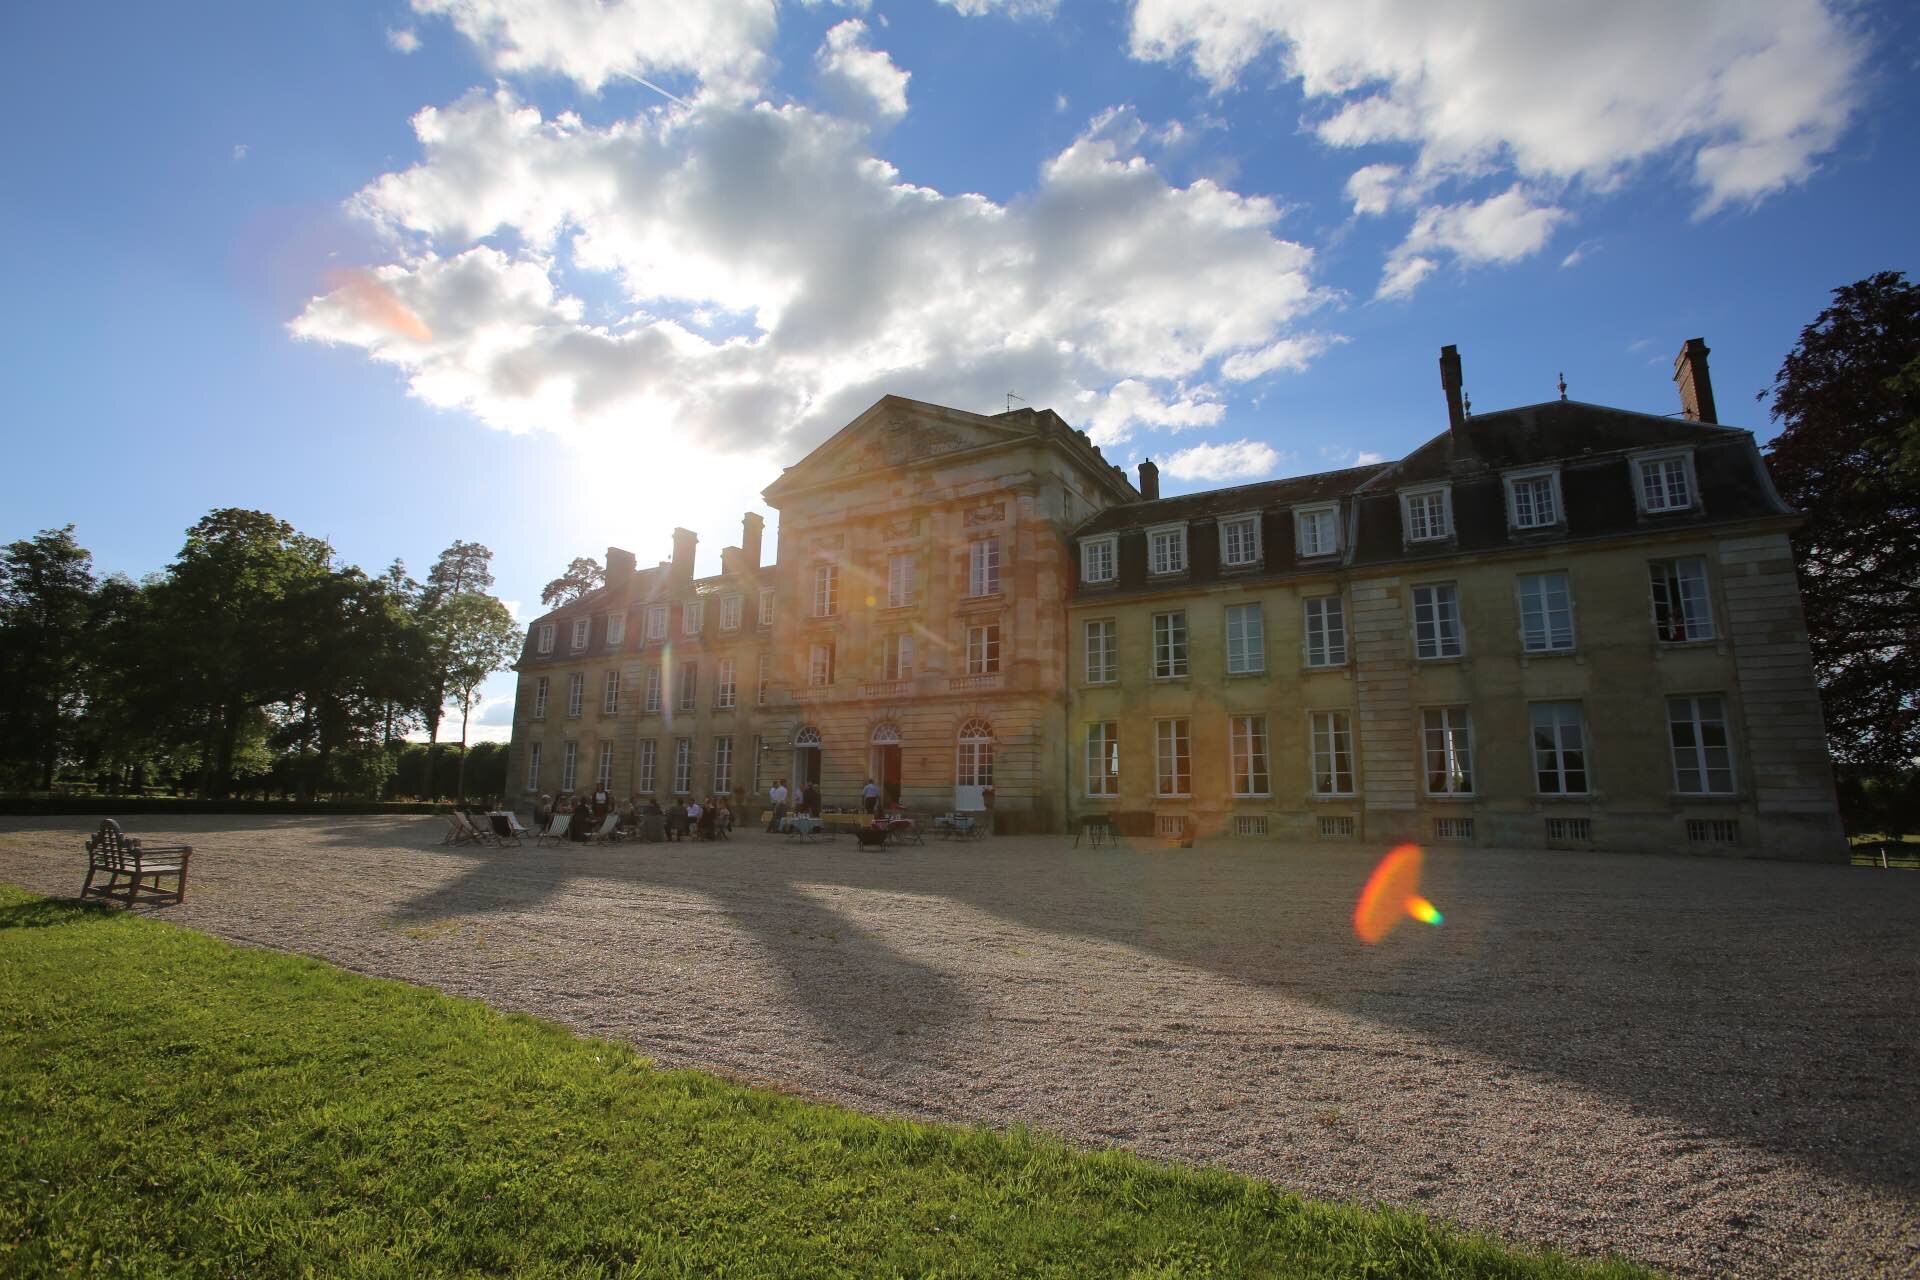 Light streaming through clouds on the facade of Chateau de Courtomer, a venue for corporate team building activities in France.